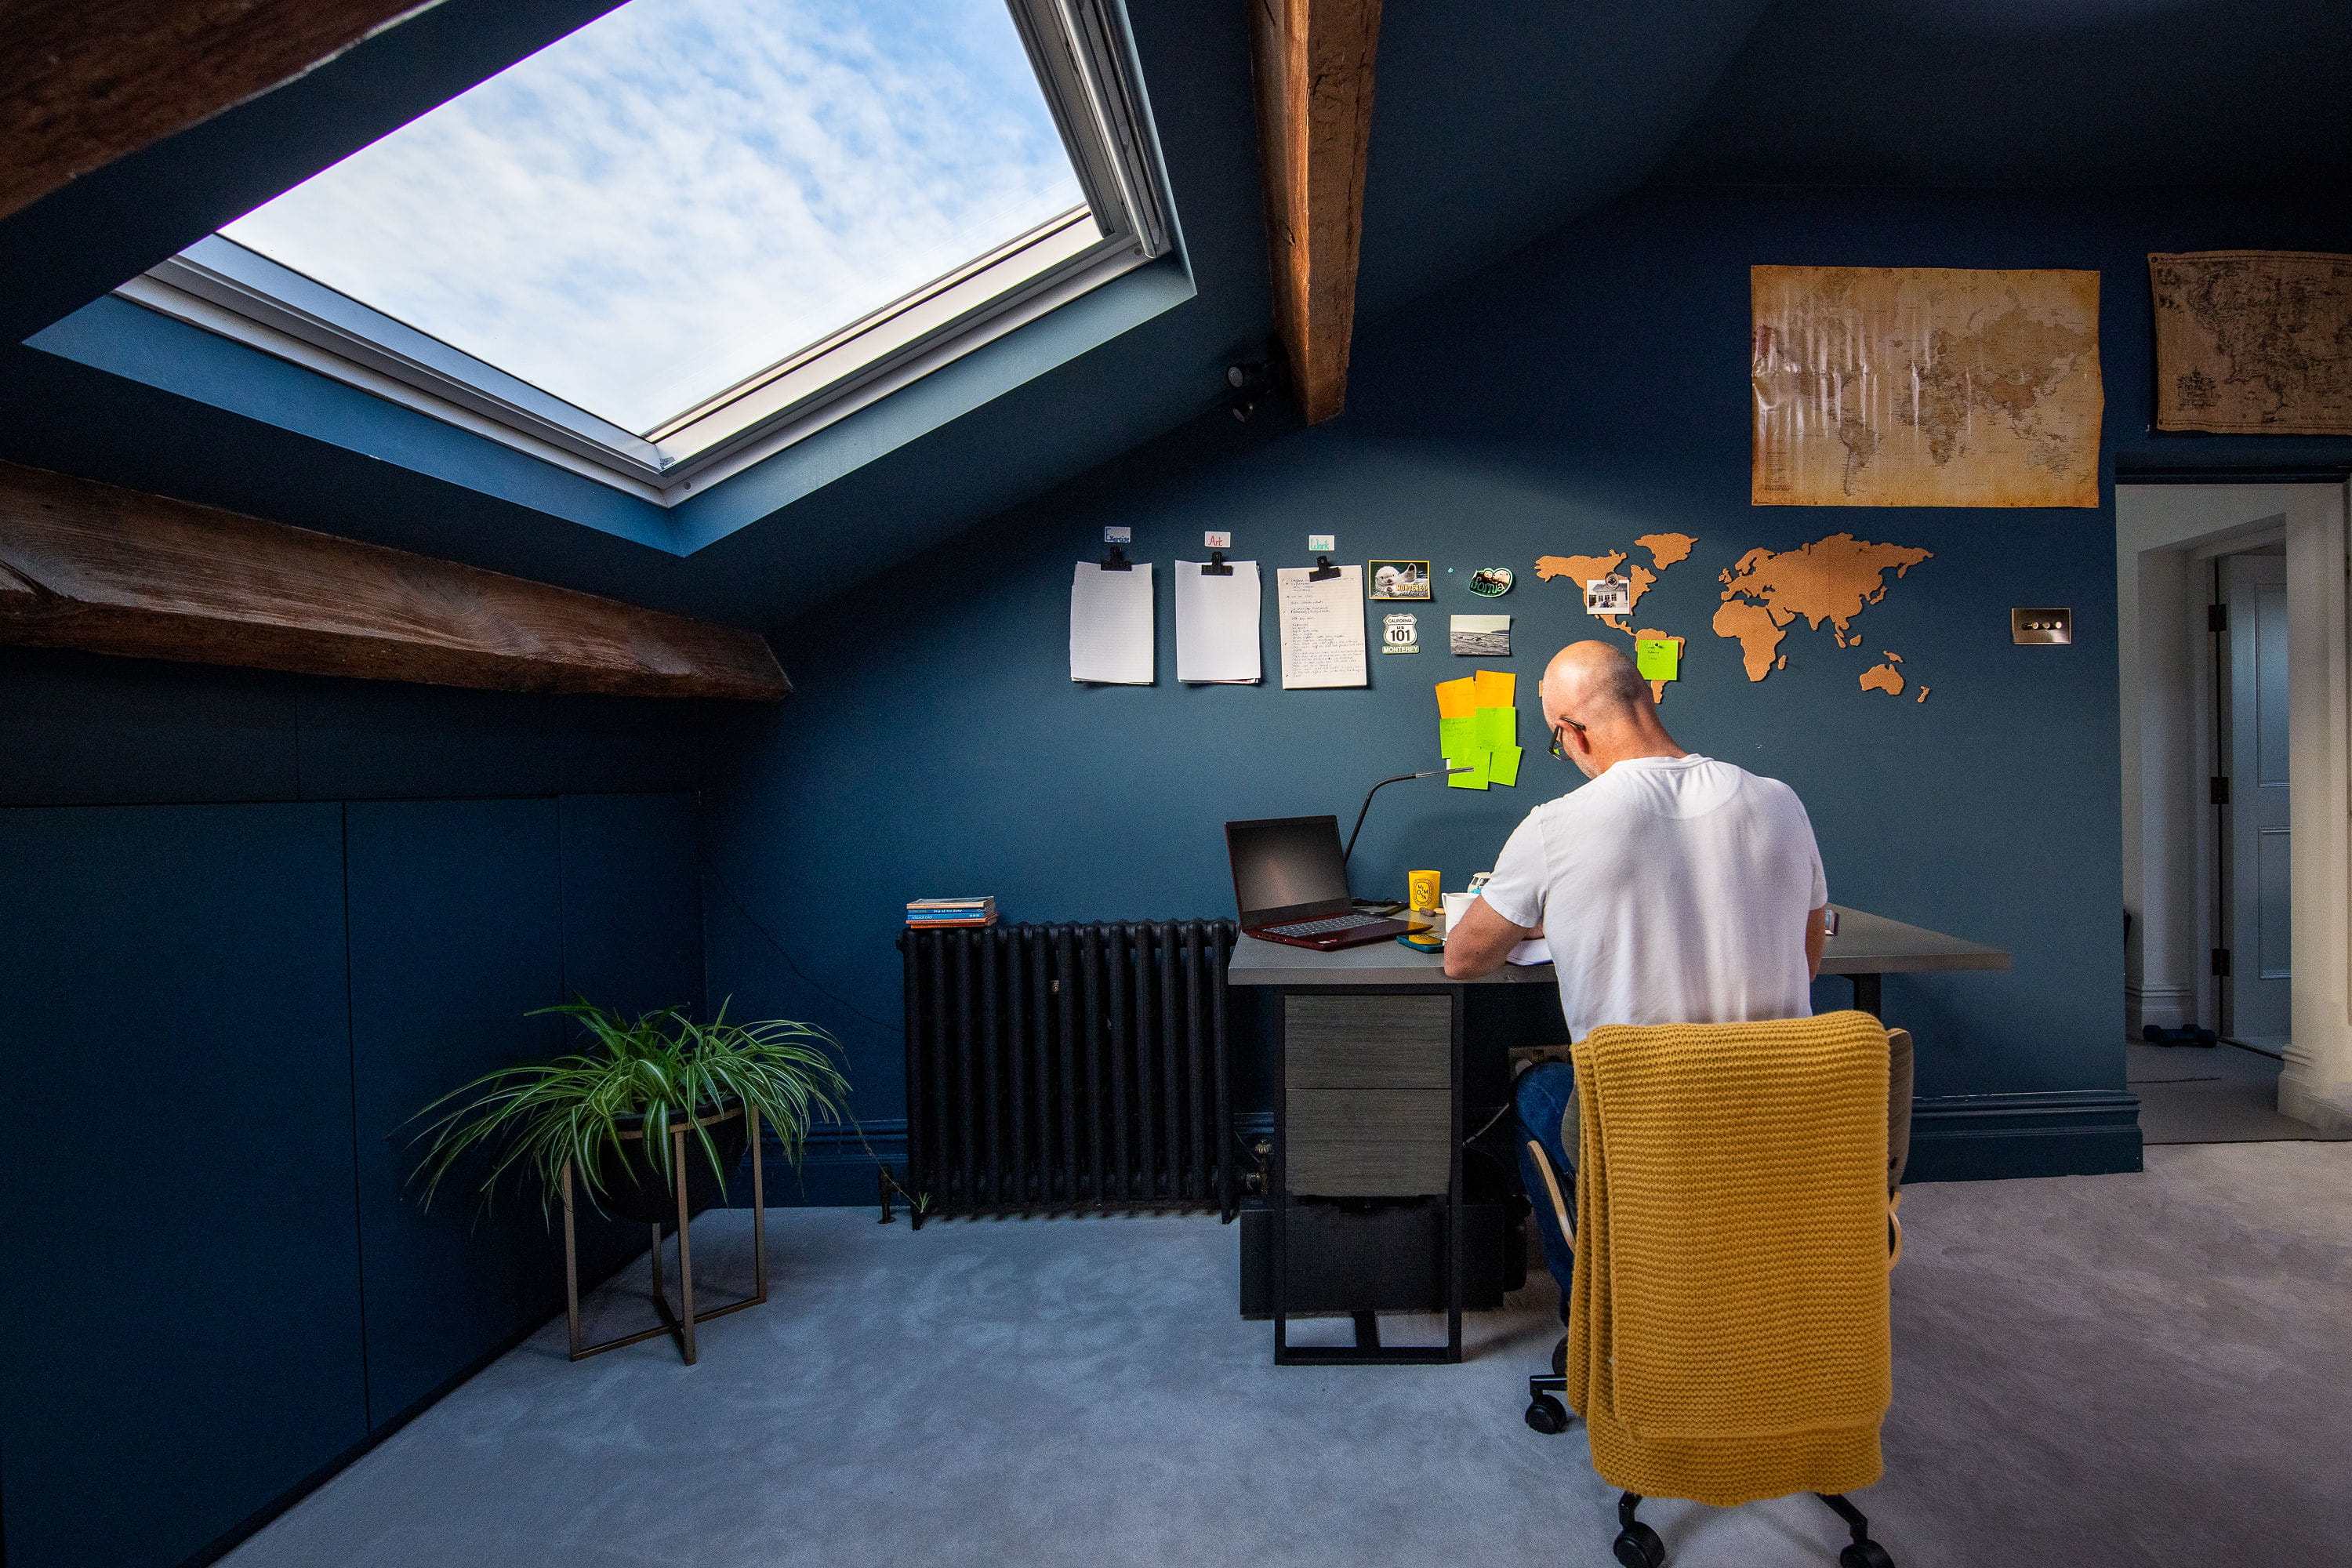 Home office with VELUX skylight, world map on wall, and man working at desk.